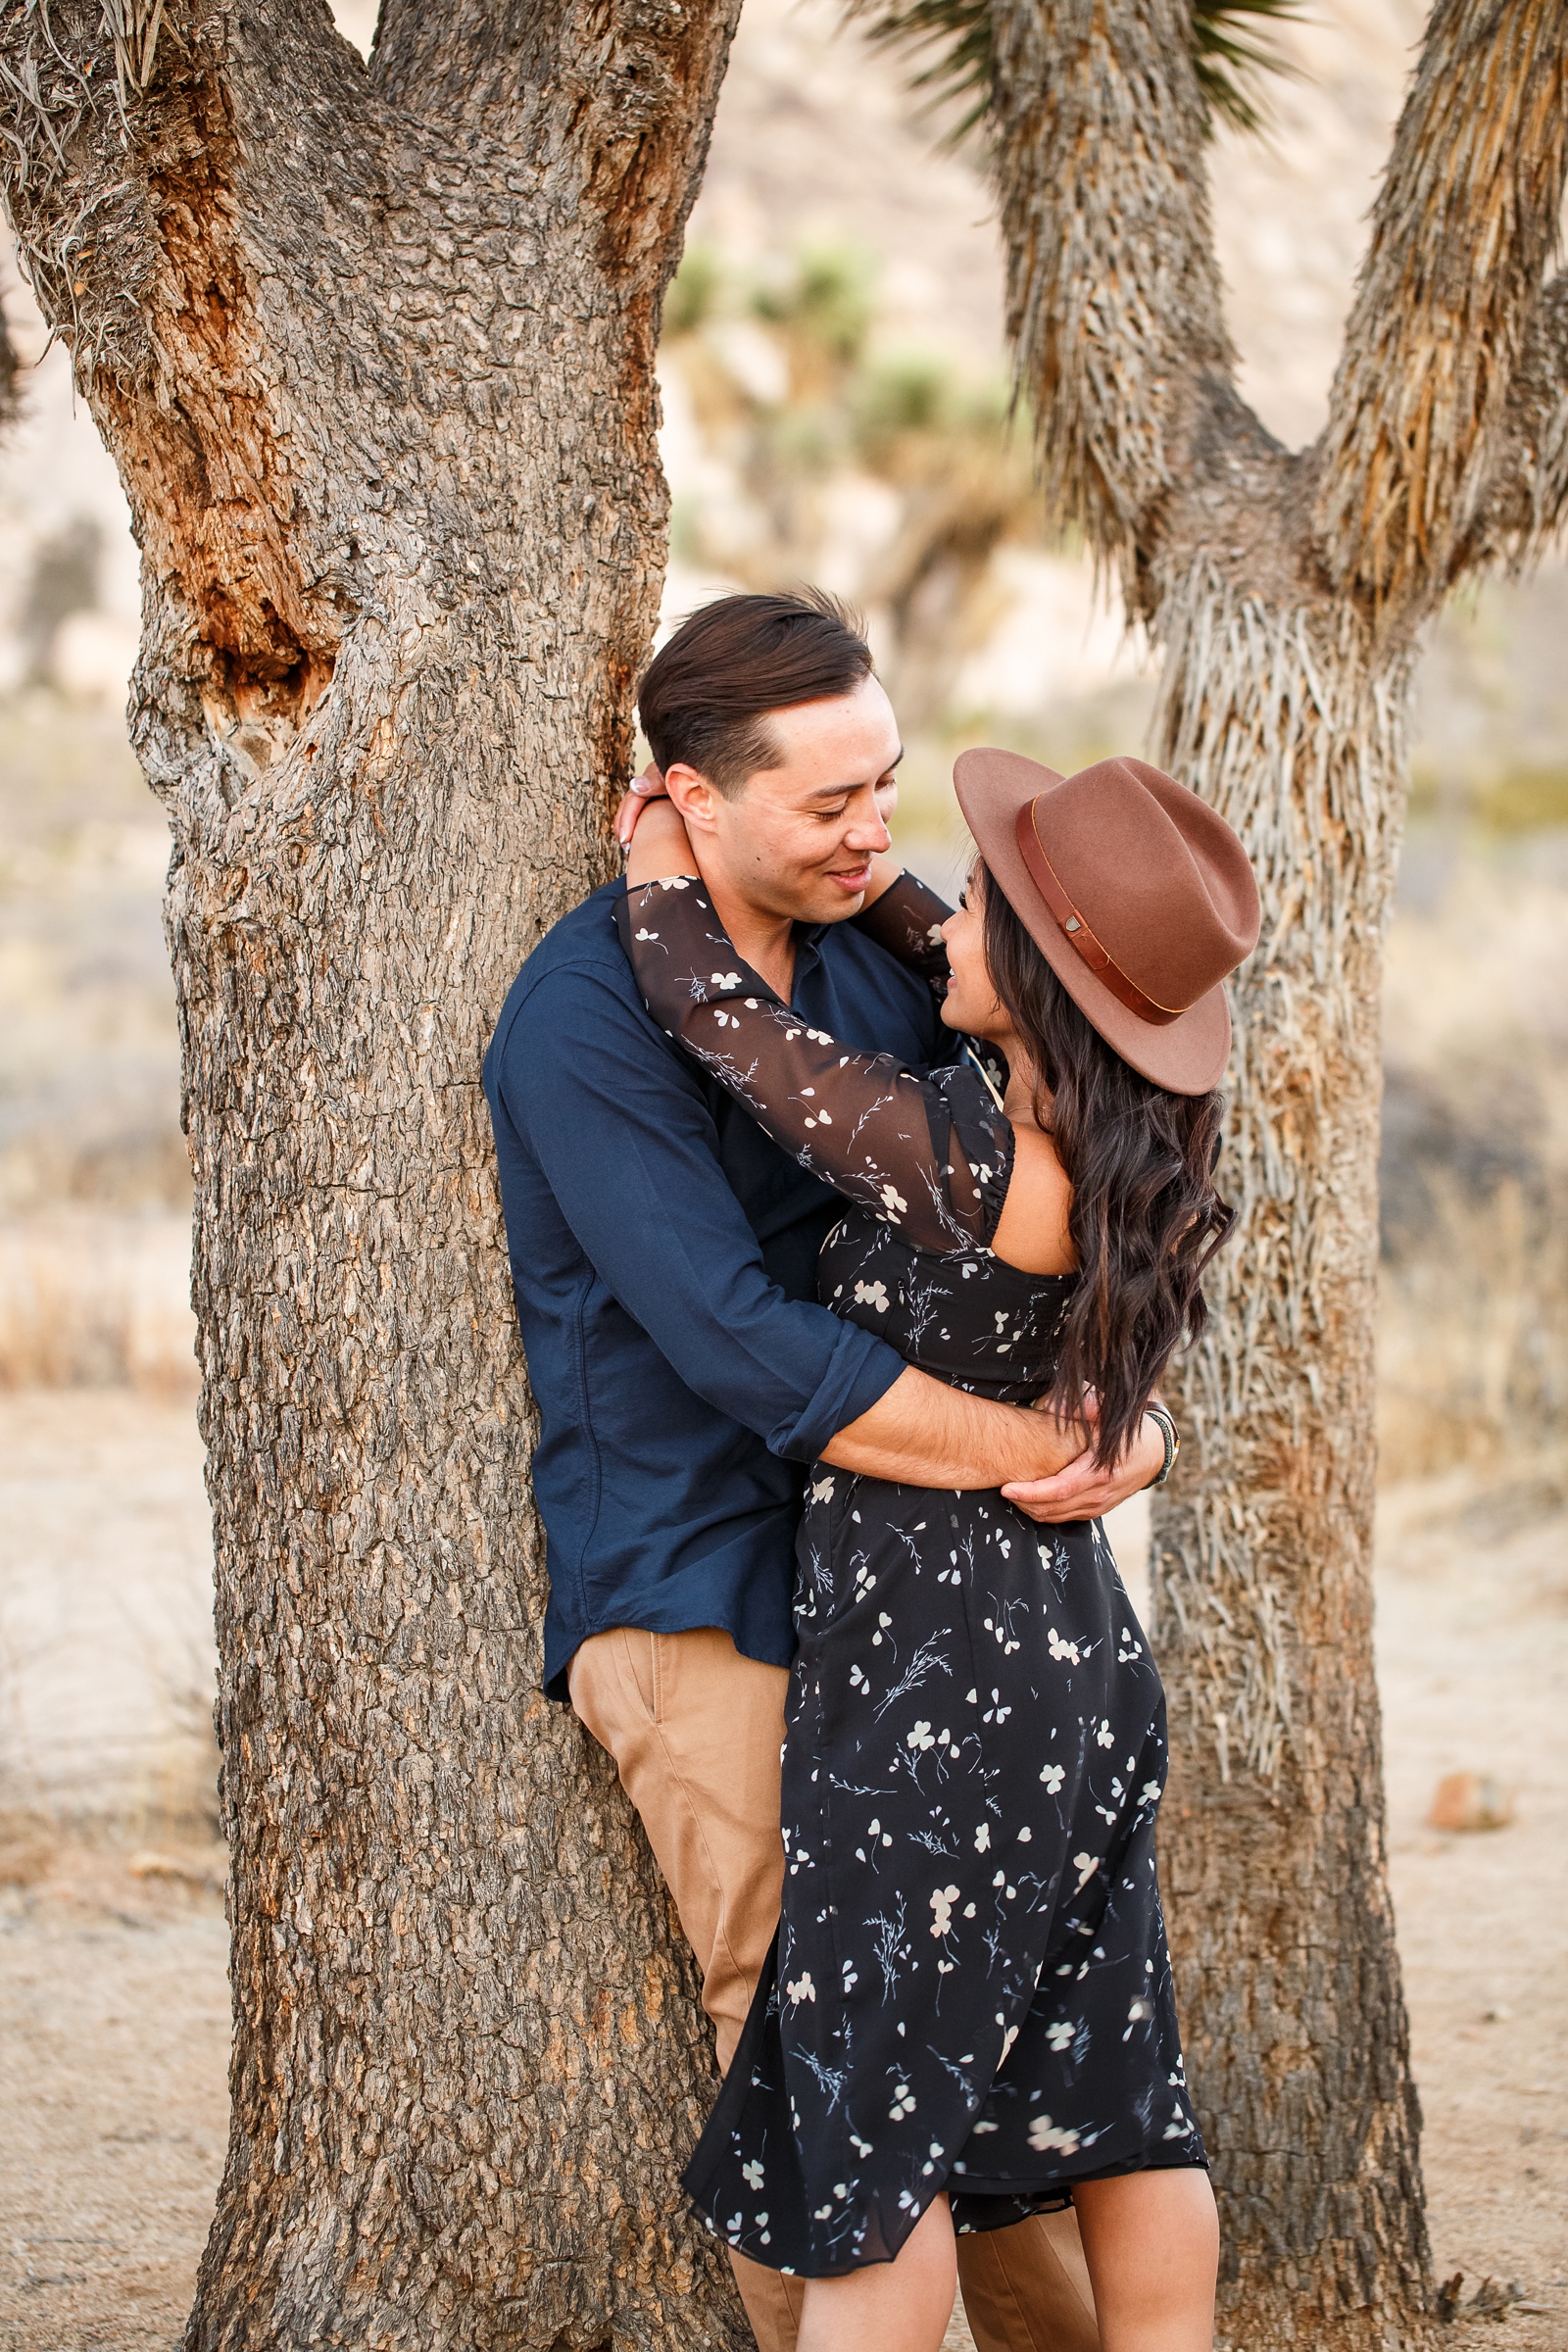 Giggling couple at their Joshua Tree NP engagement session.